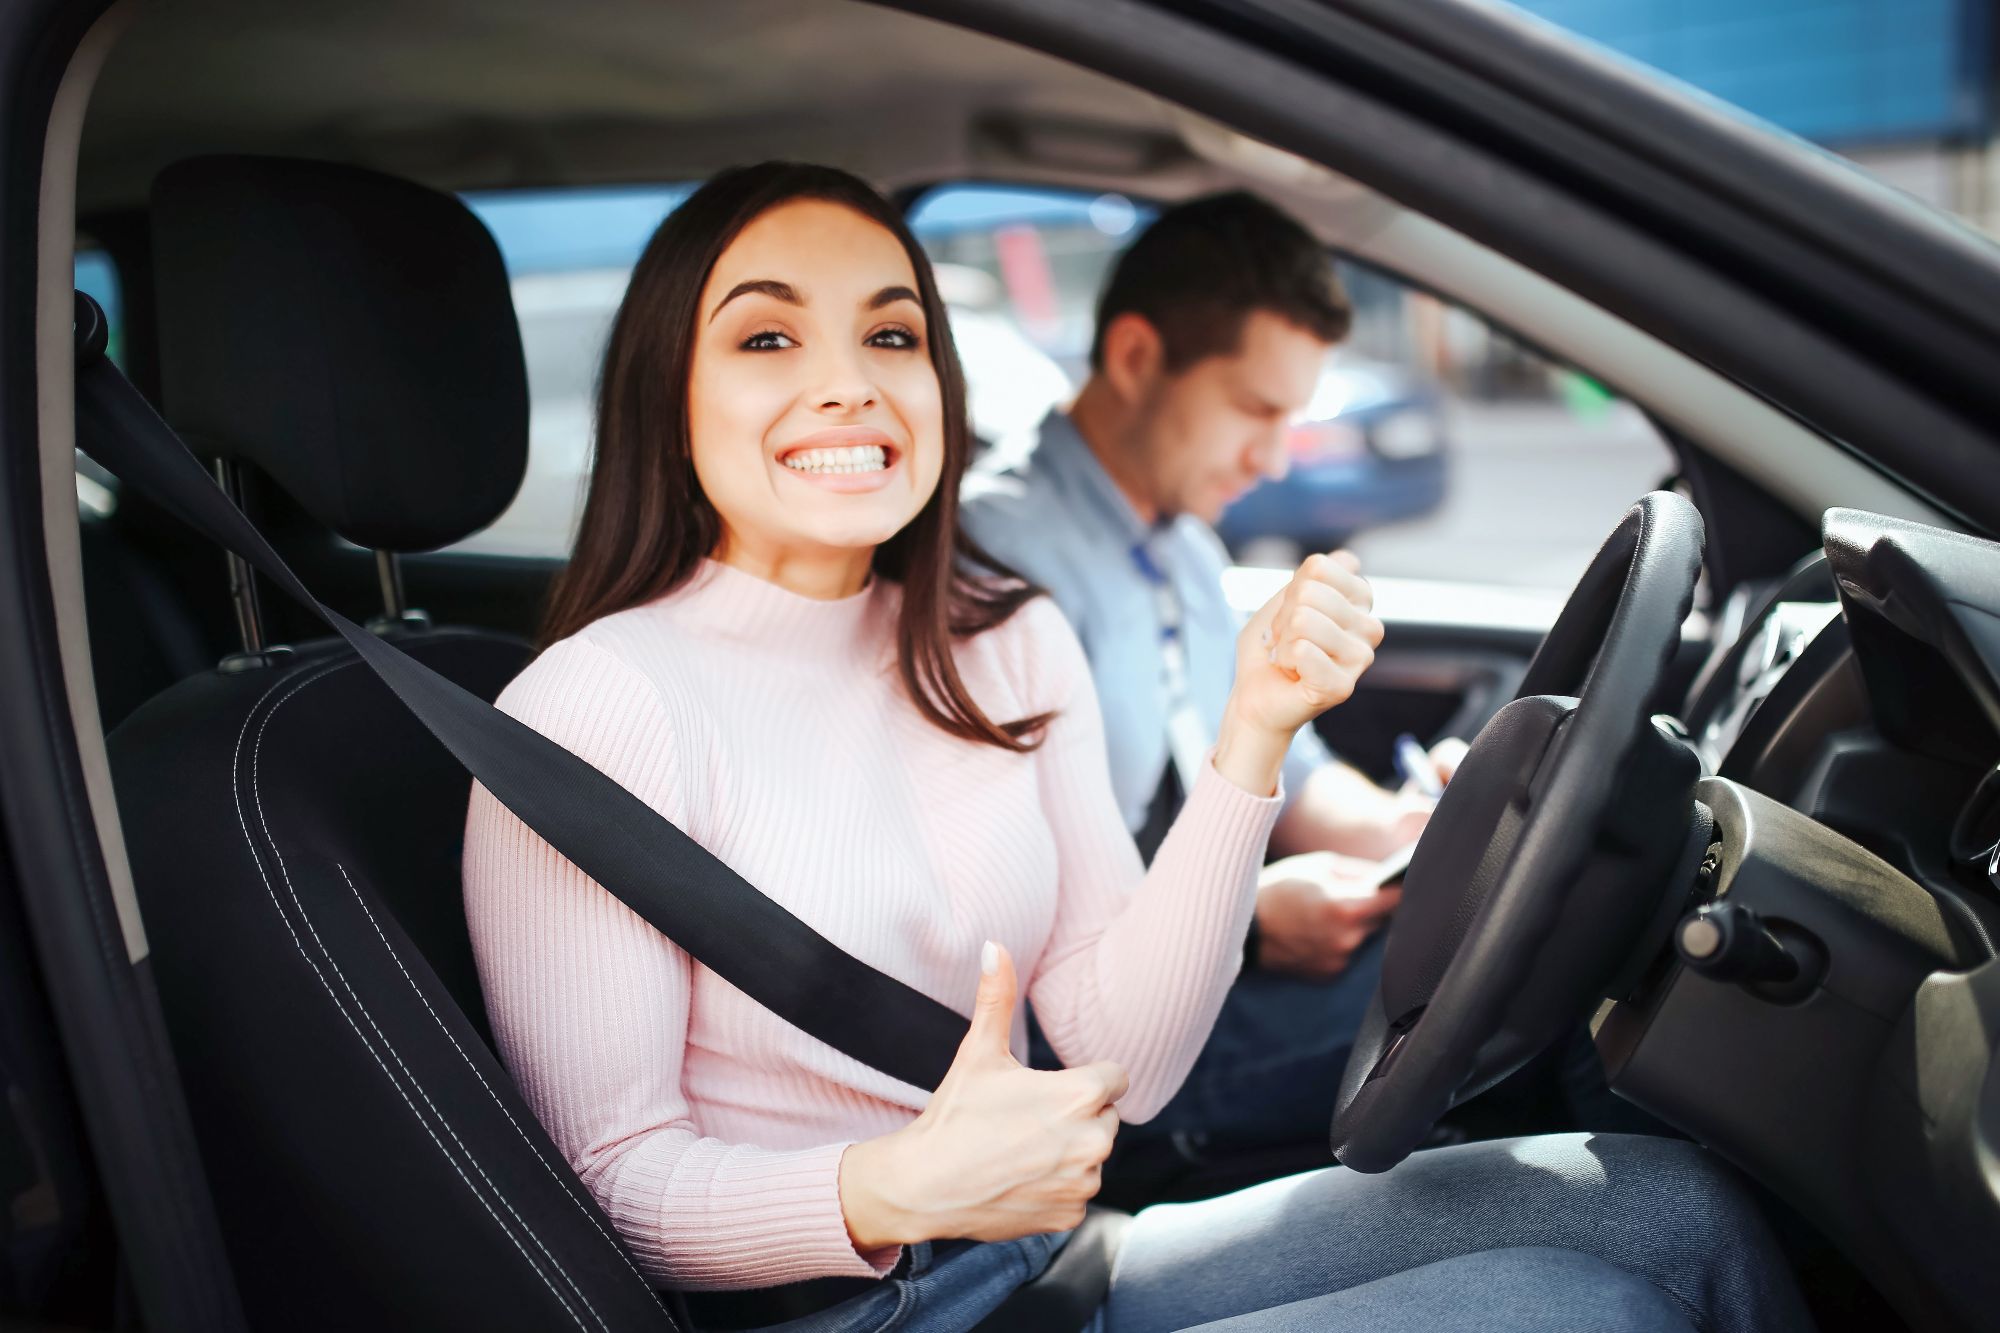 driving lessons in telford shropshire with local telford driving school driver training ltd